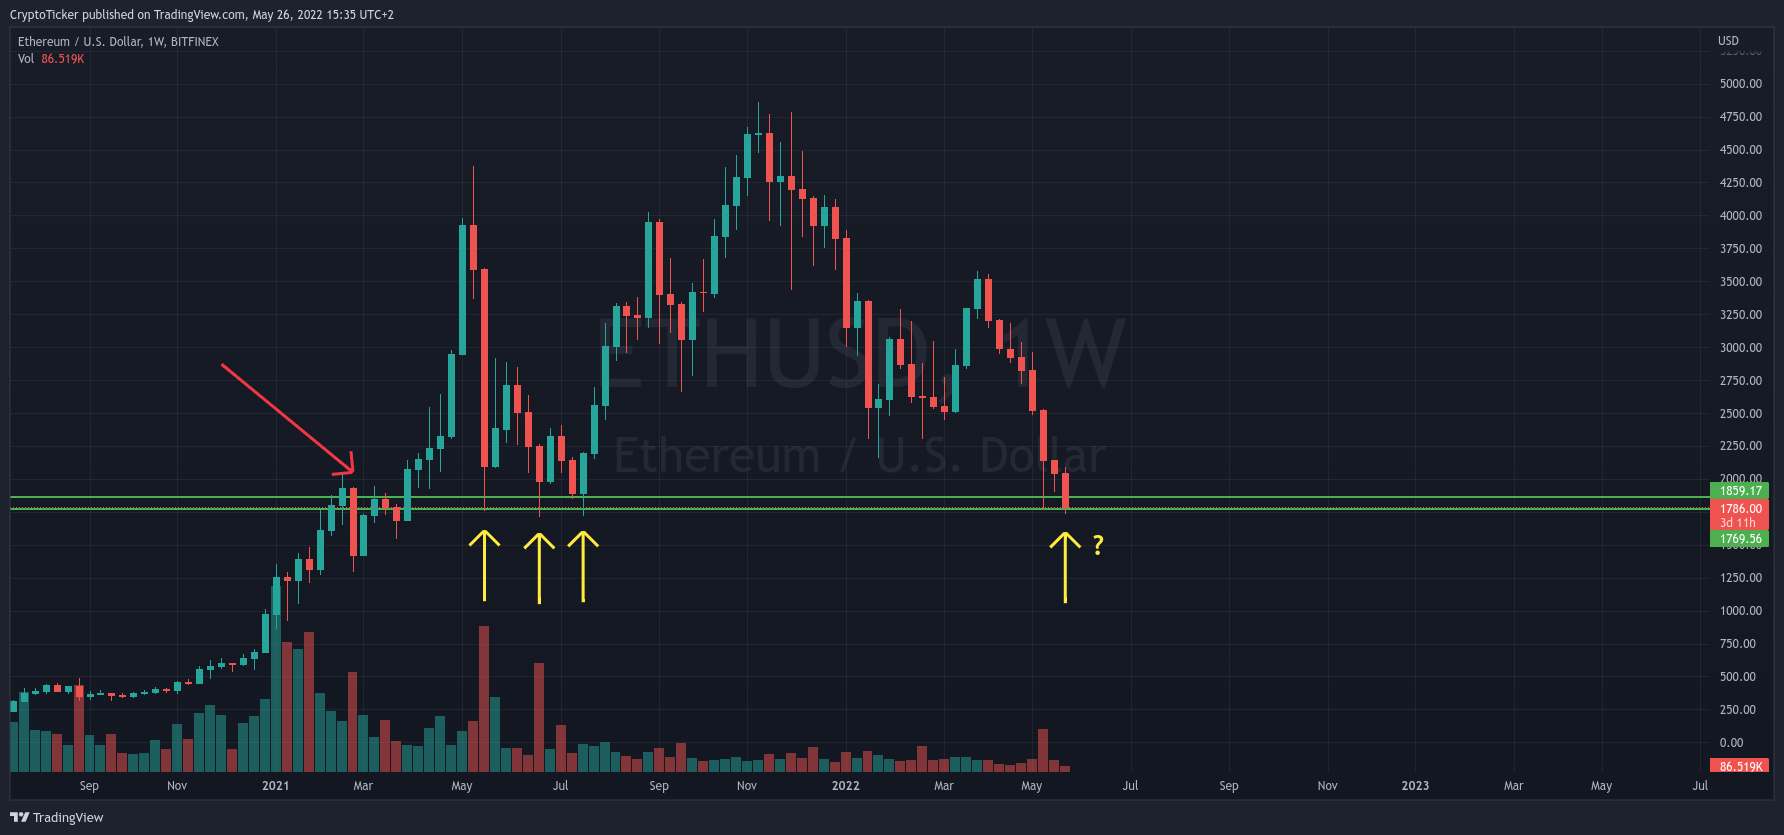 ETH/USD 1-week chart showing the strong support of ETH